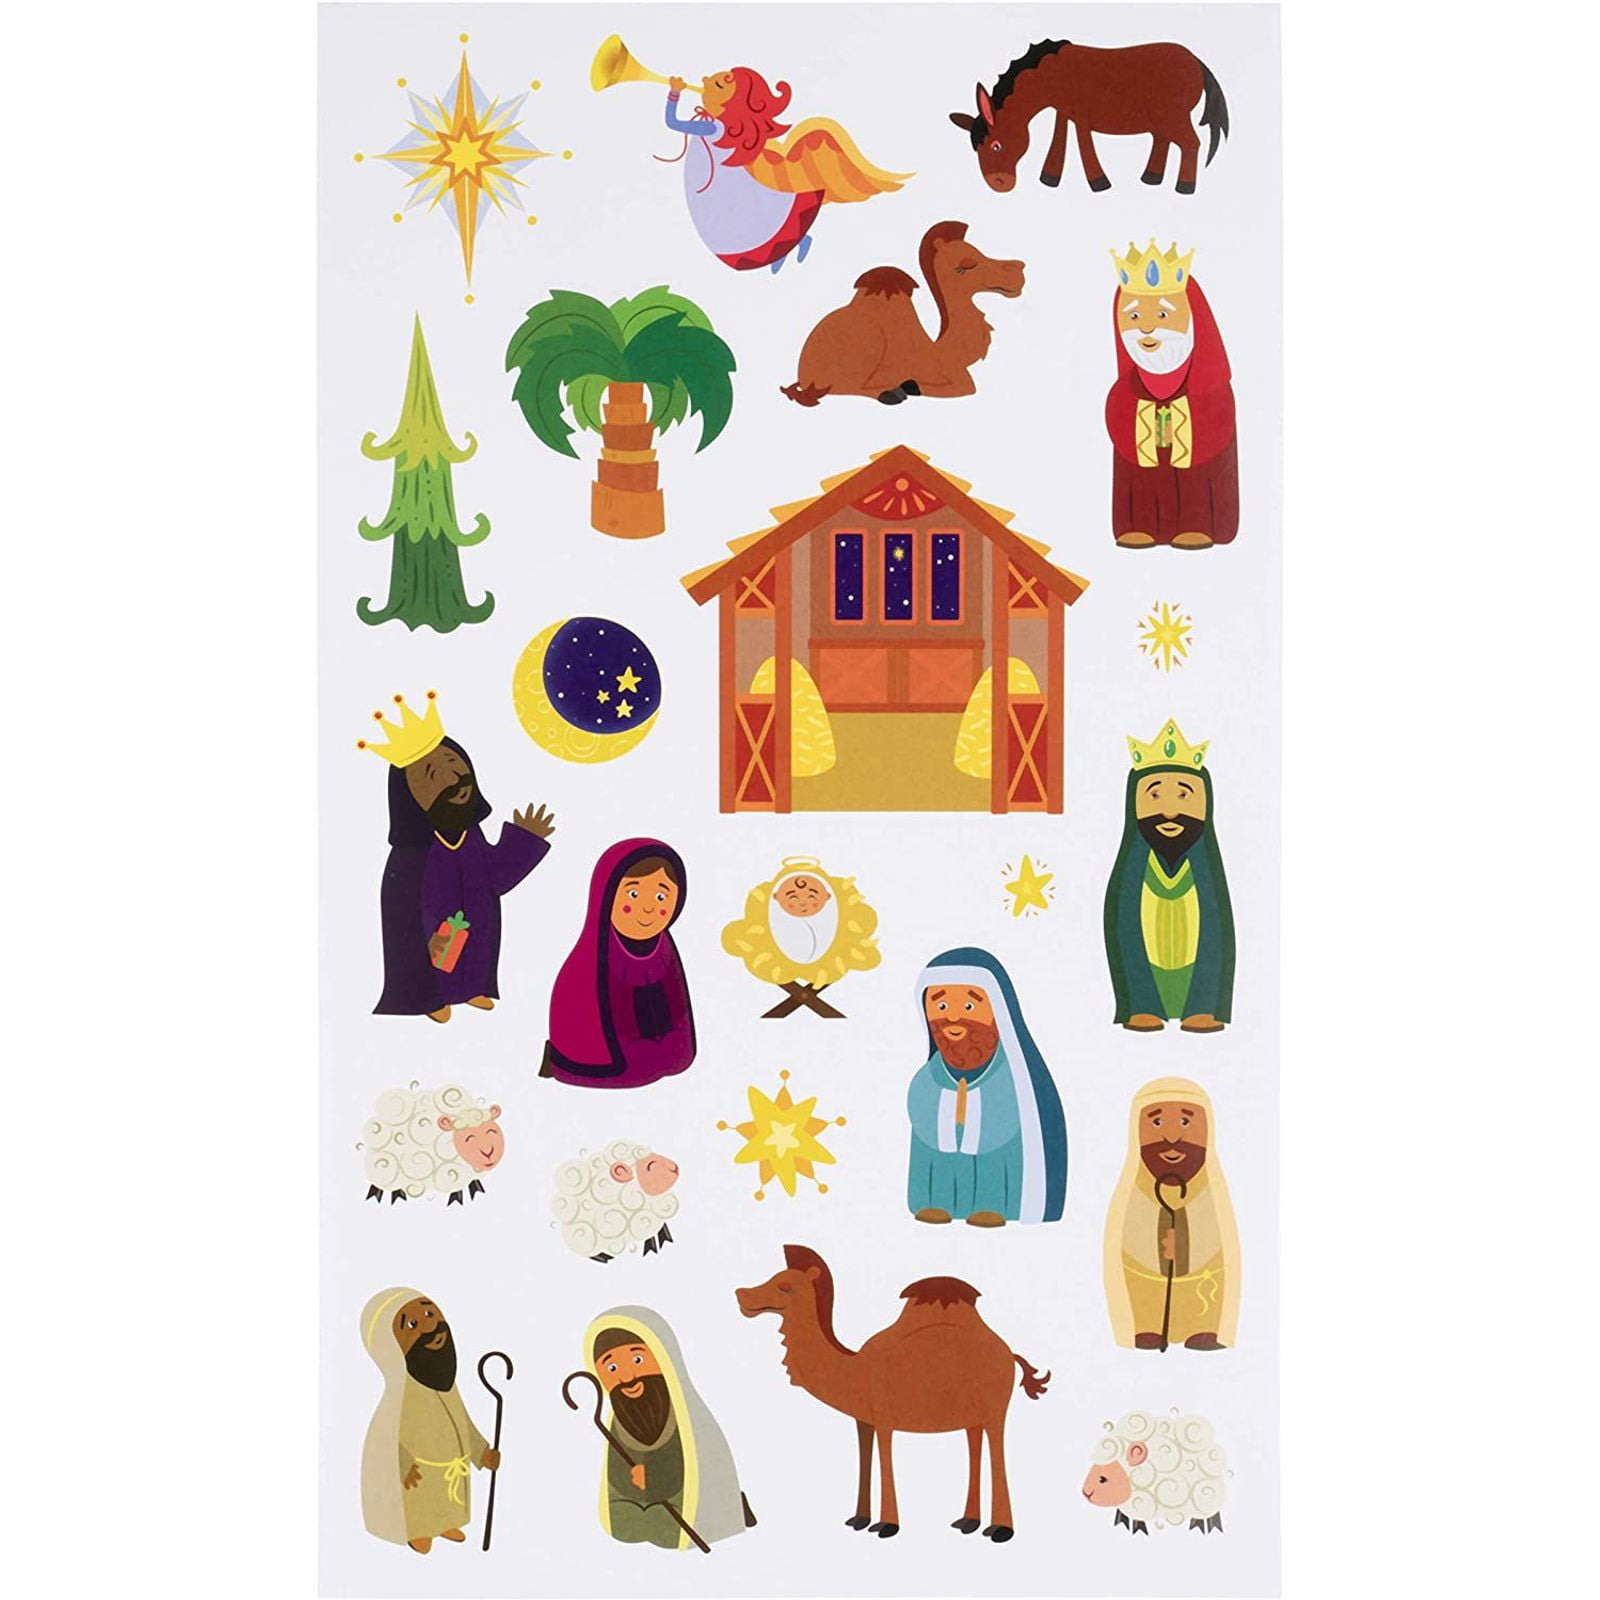 45 Assorted Christmas Navity Foam Stickers Design Crafts Card Making Decorations 